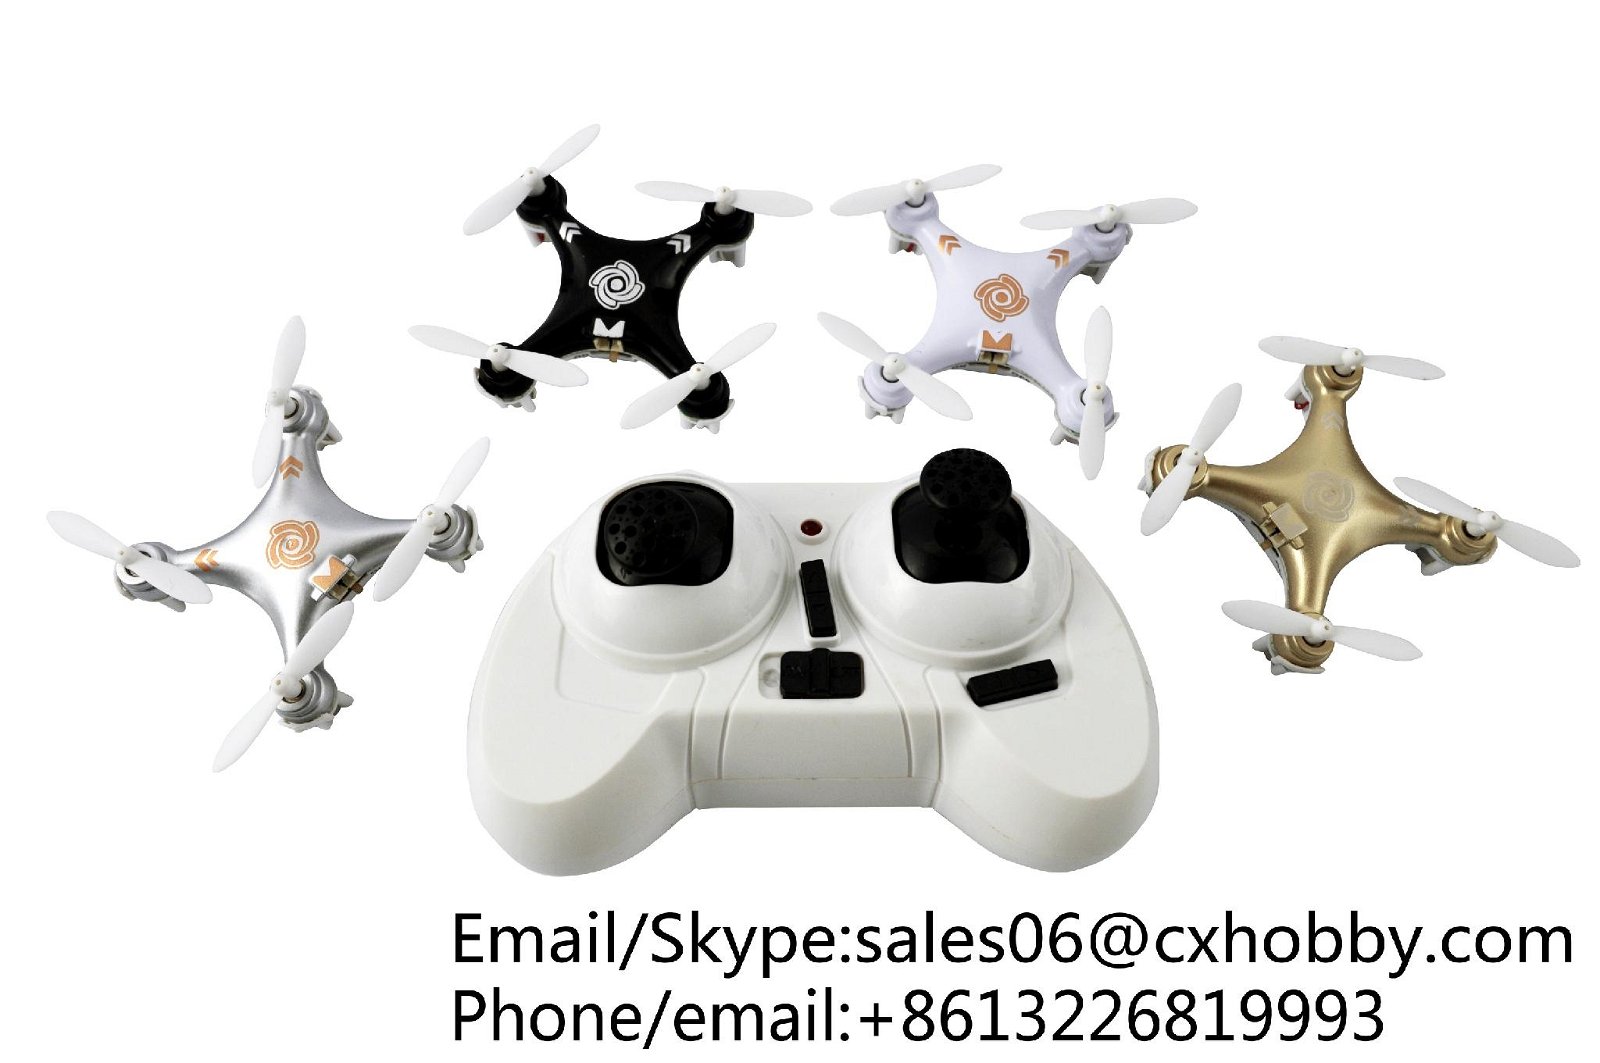 Cheerson Factory| Mni toy Quadcopter RC quadcopter mini drone, flip function